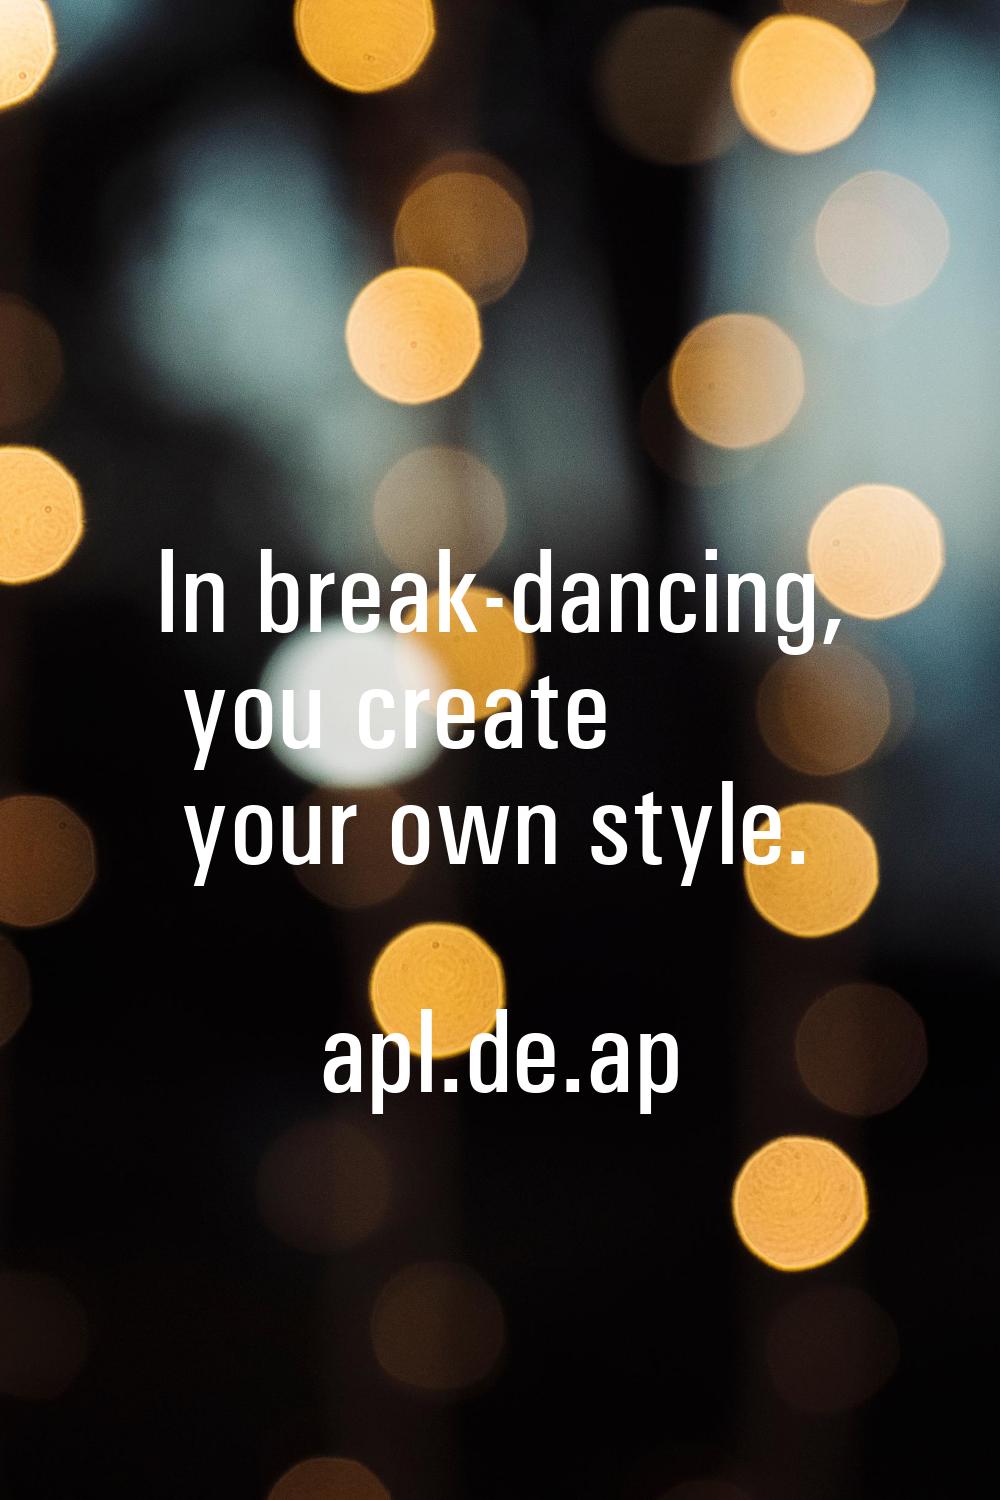 In break-dancing, you create your own style.